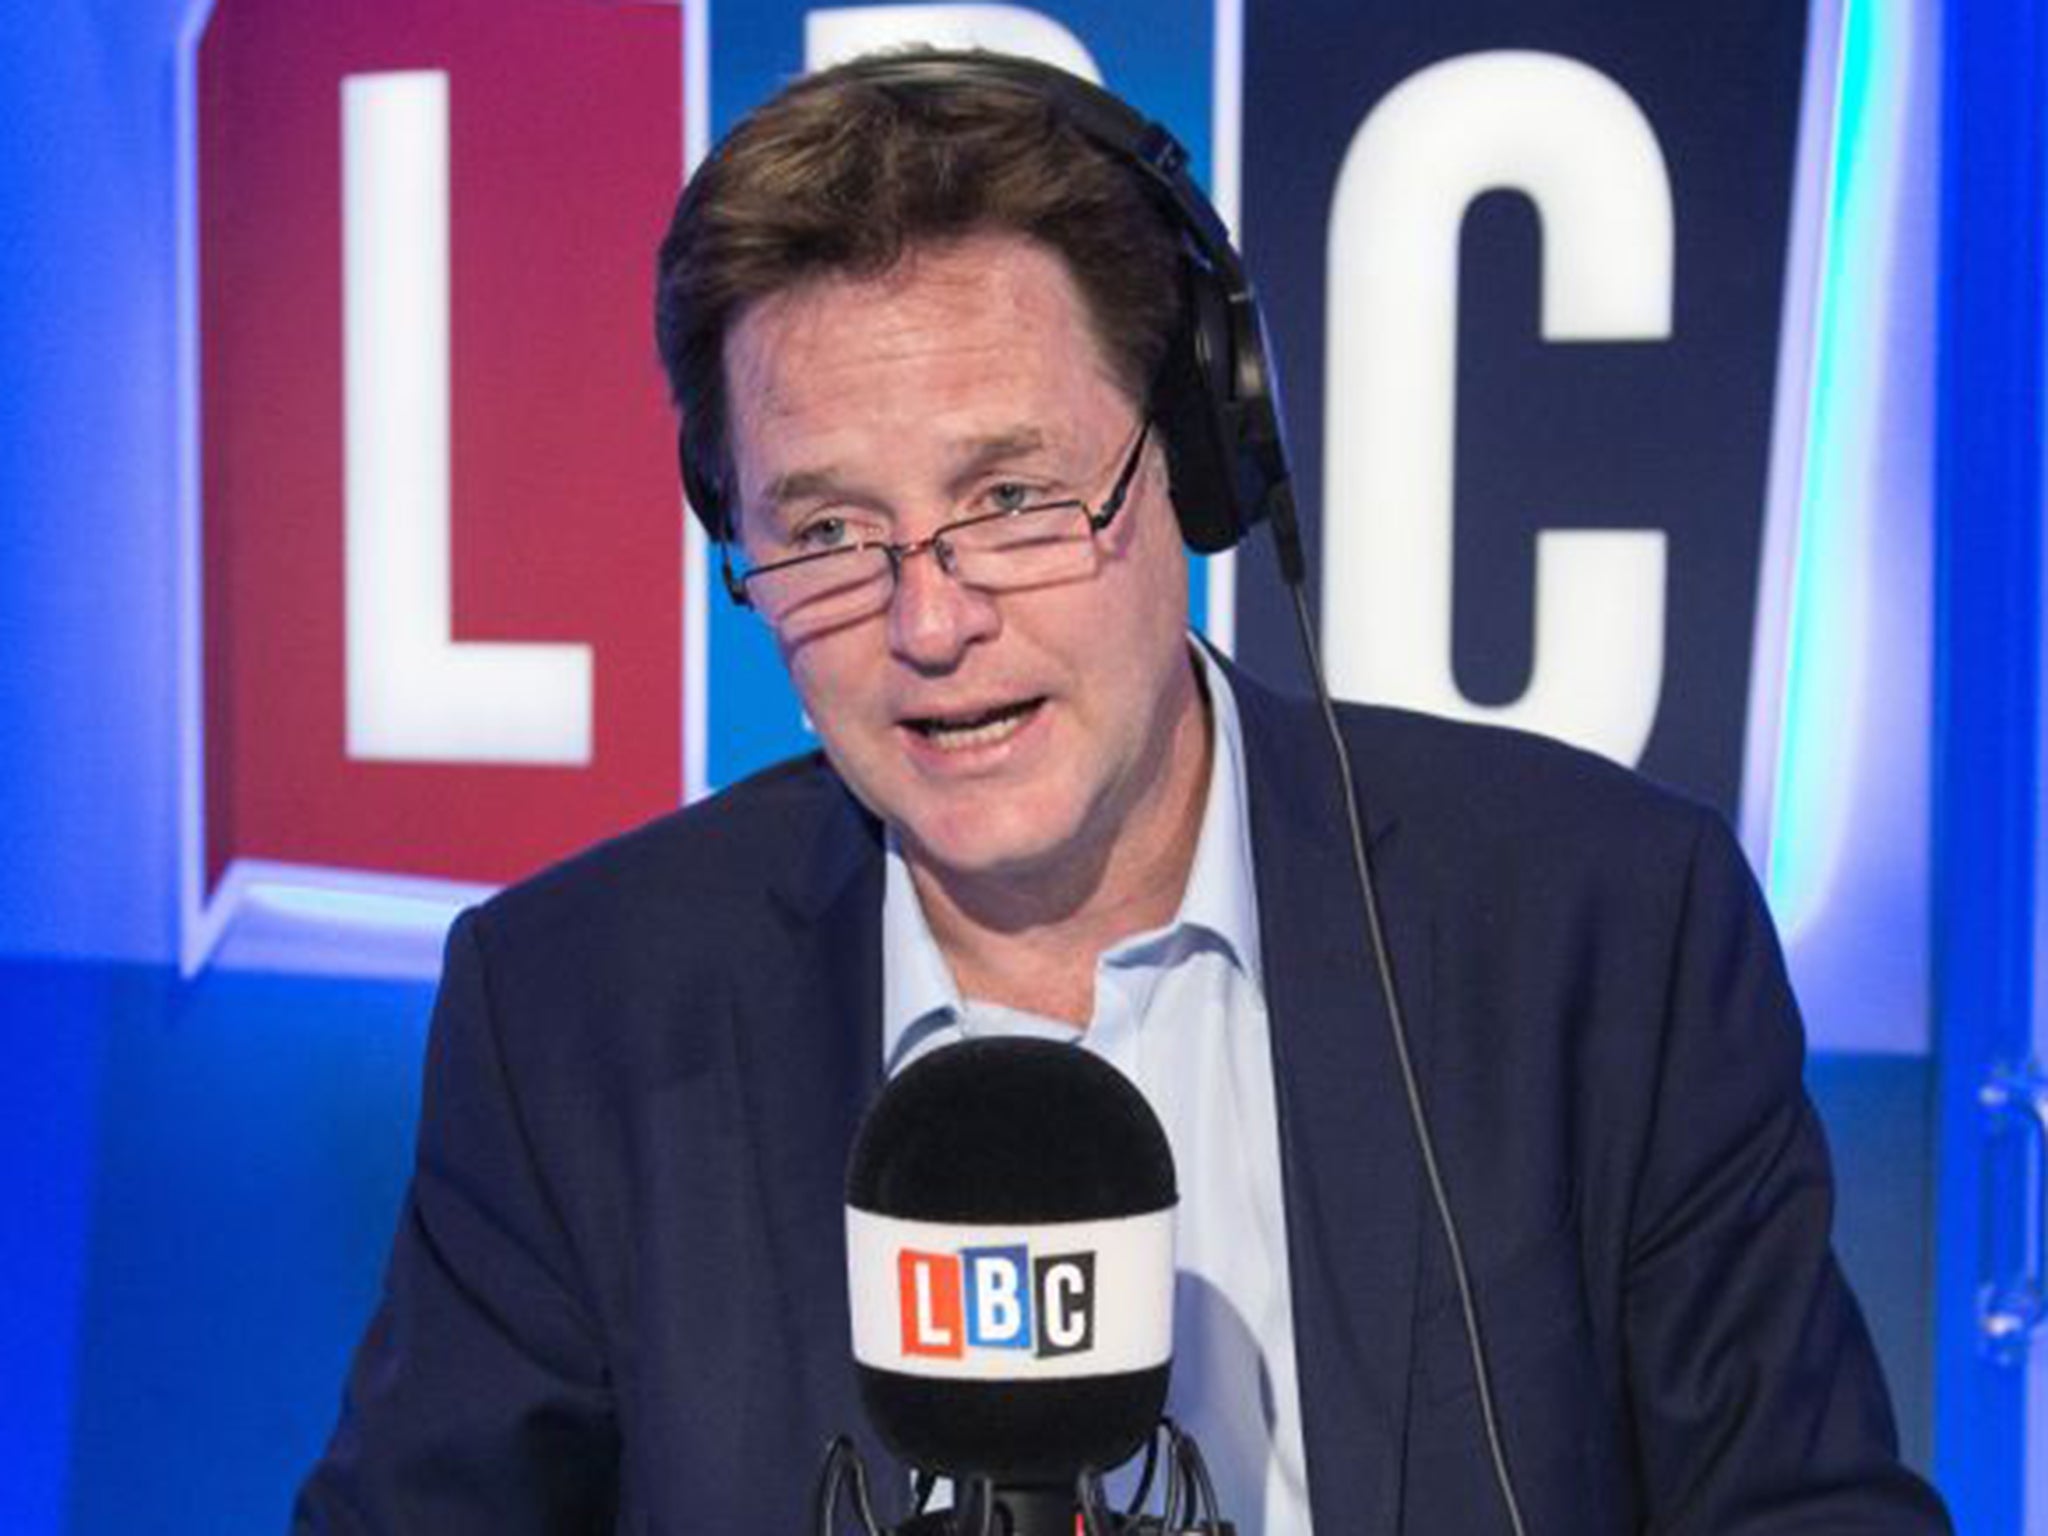 Nick Clegg extended and received forgiveness on LBC on Thursday